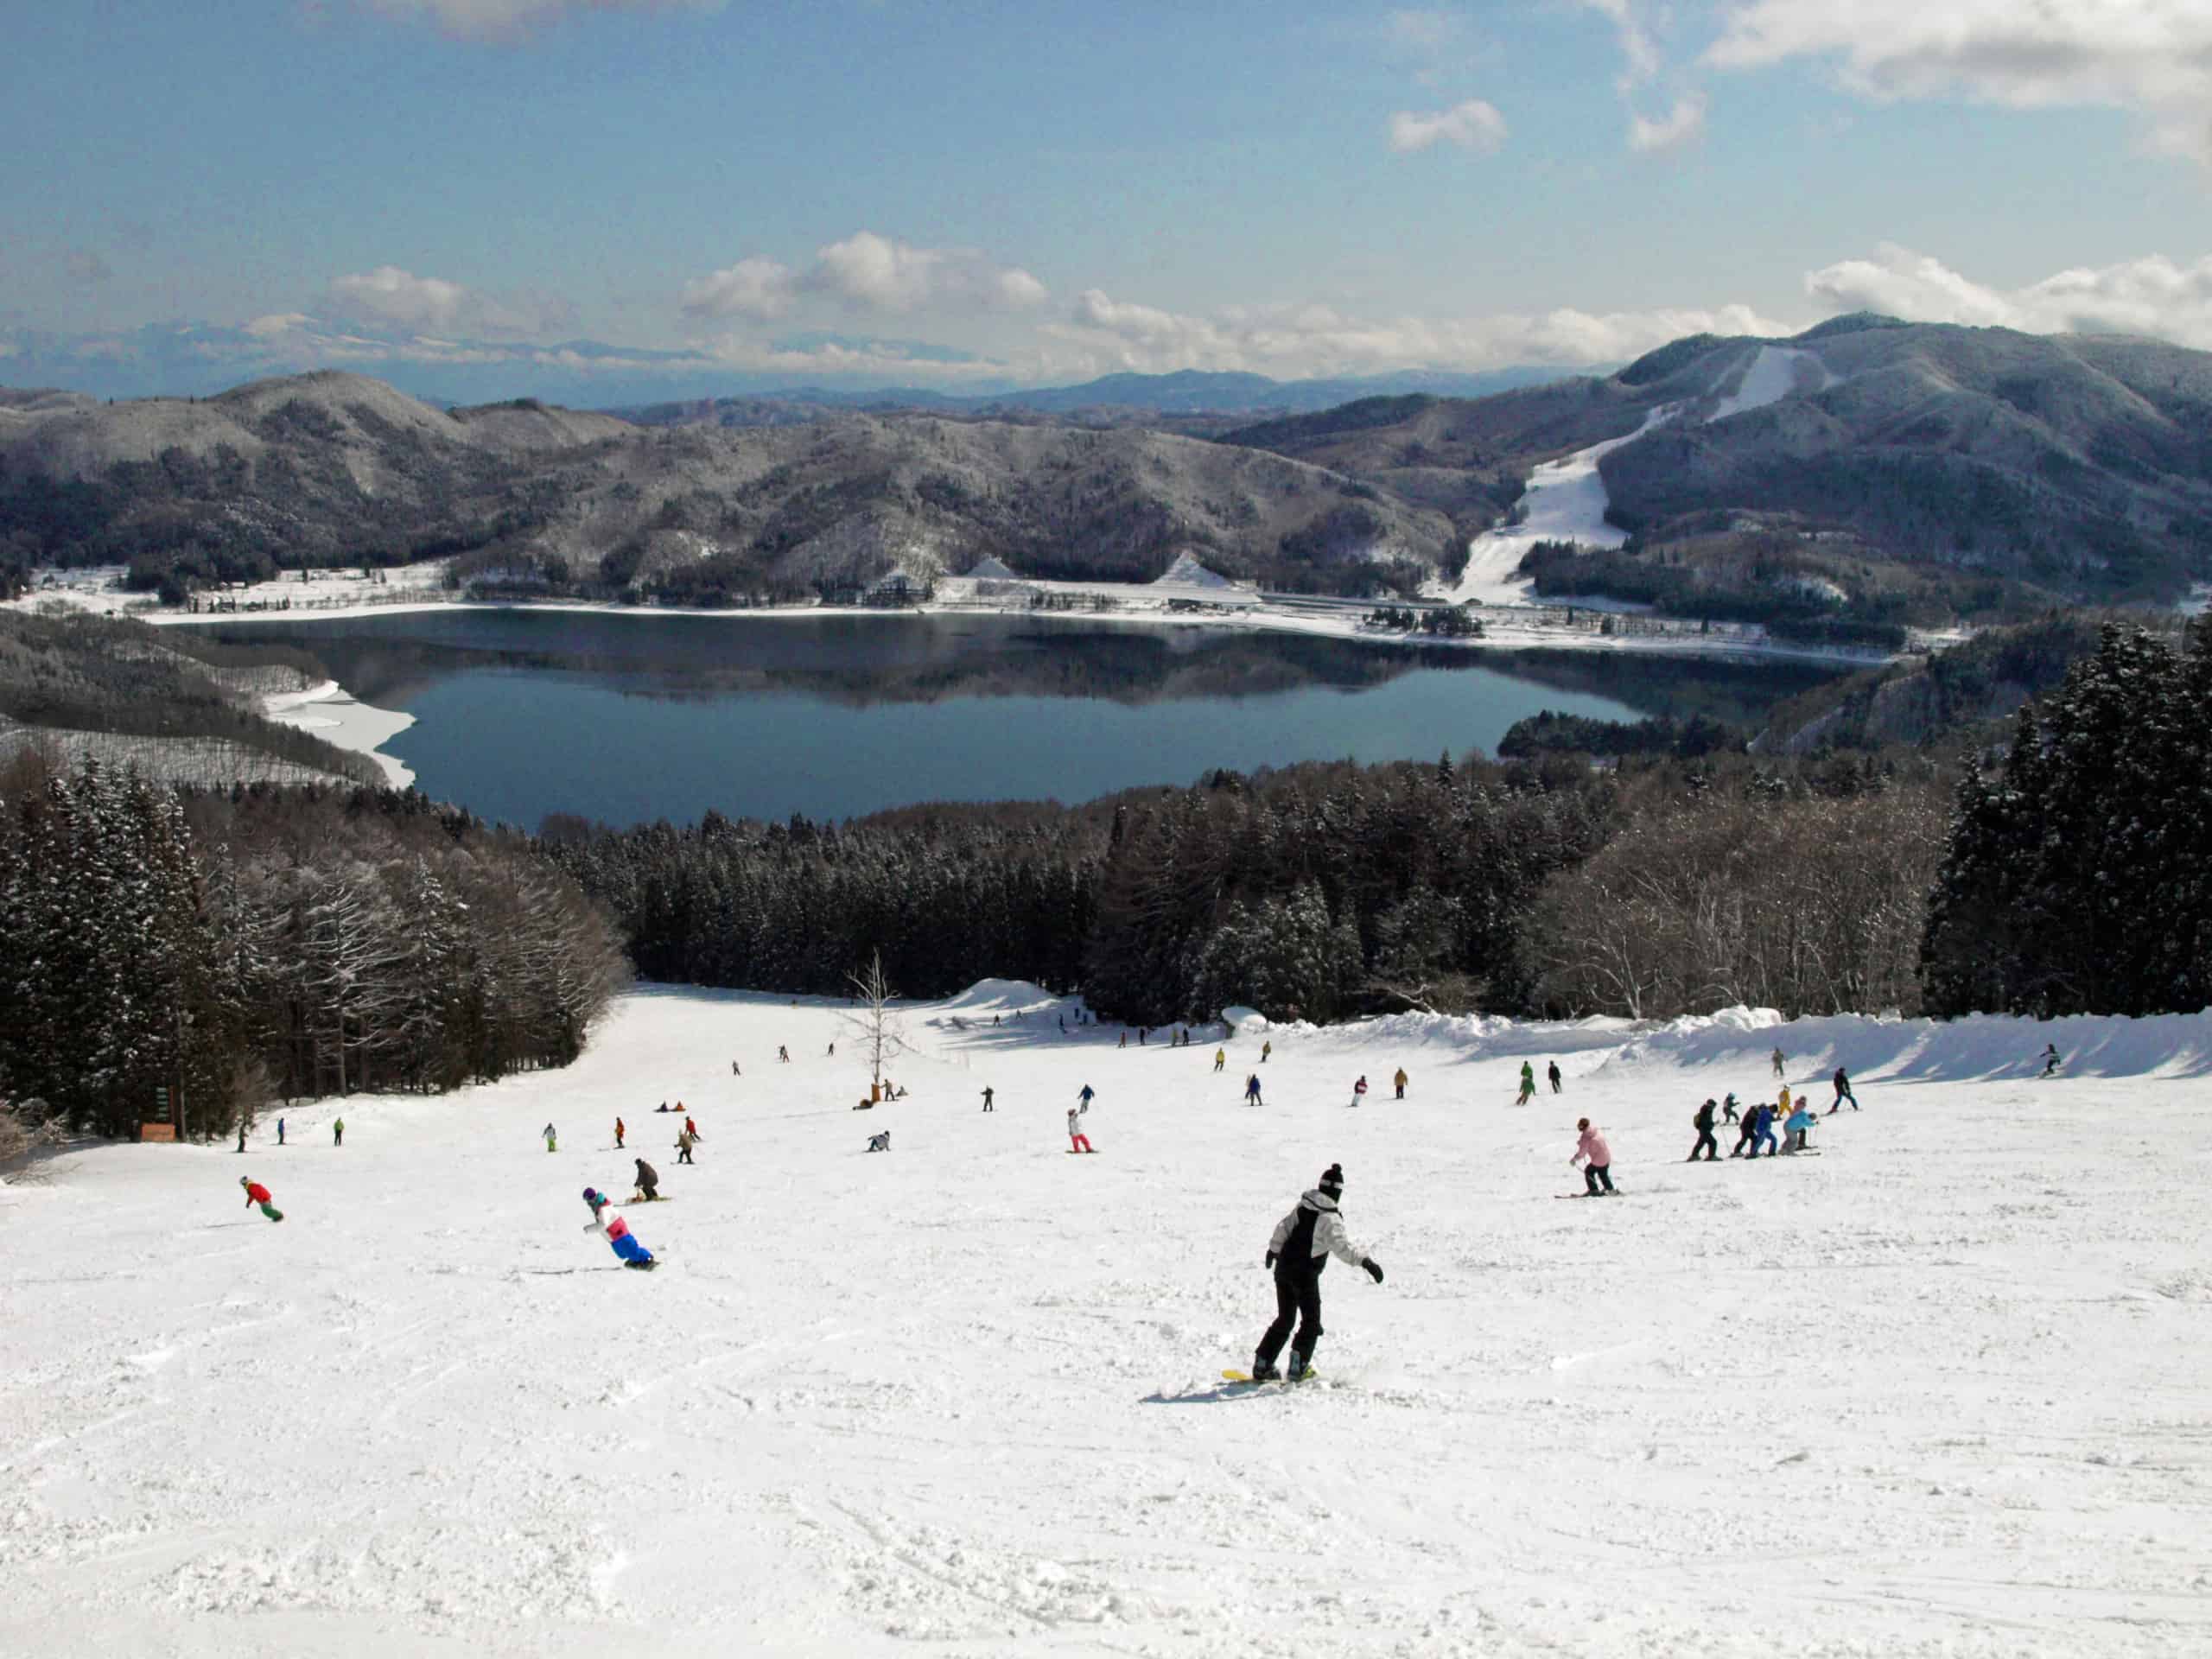 Sanosaka is one of the smaller resorts in the Hakuba Valley with beautiful views over Lake Aoki and perfect intermediate terrain